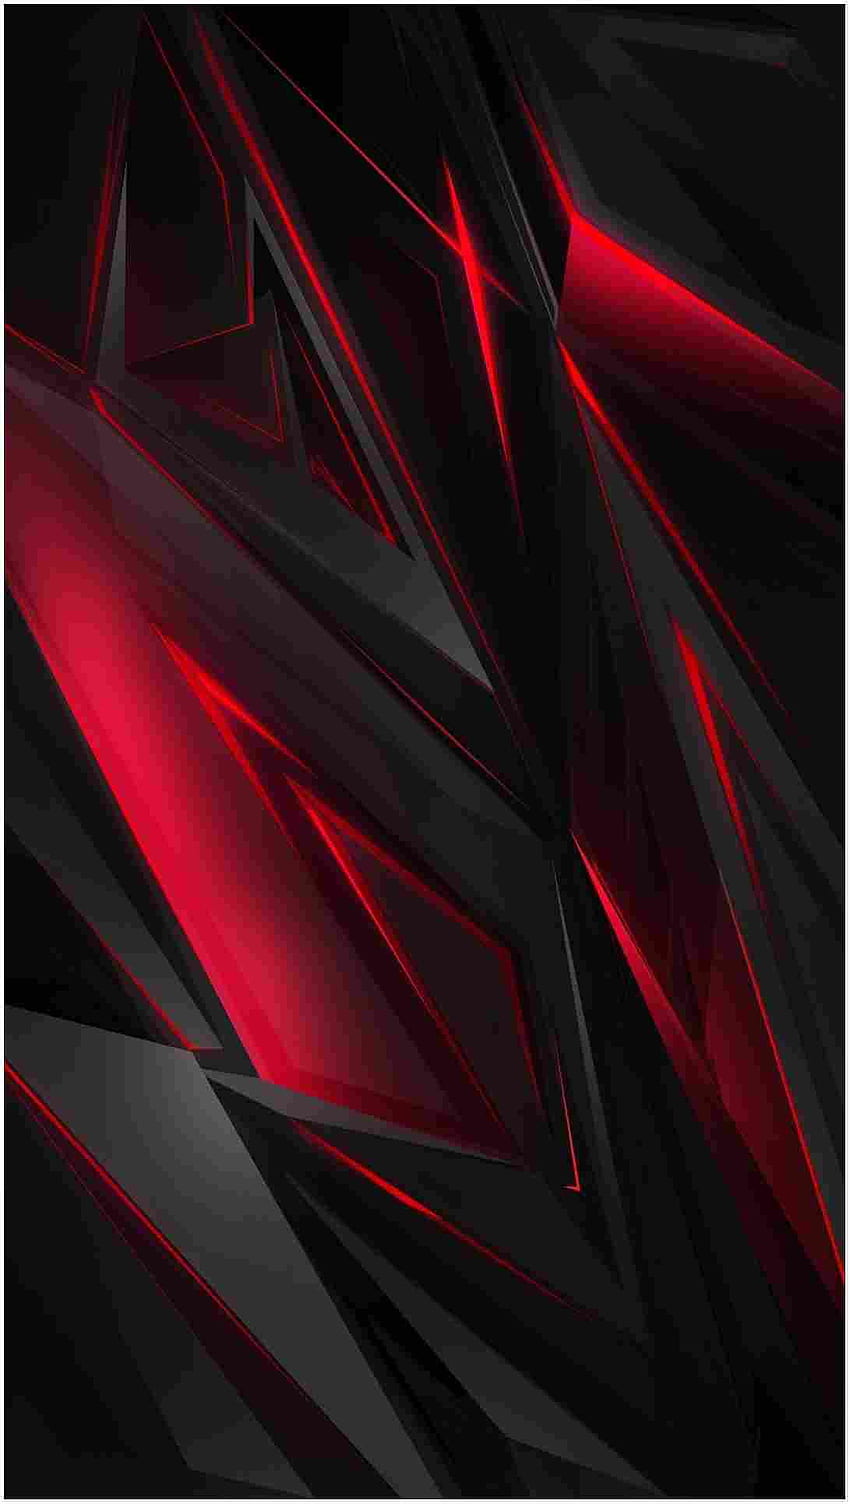 Most popular 13 red and black - 2020 latest Update Wise HD phone wallpaper